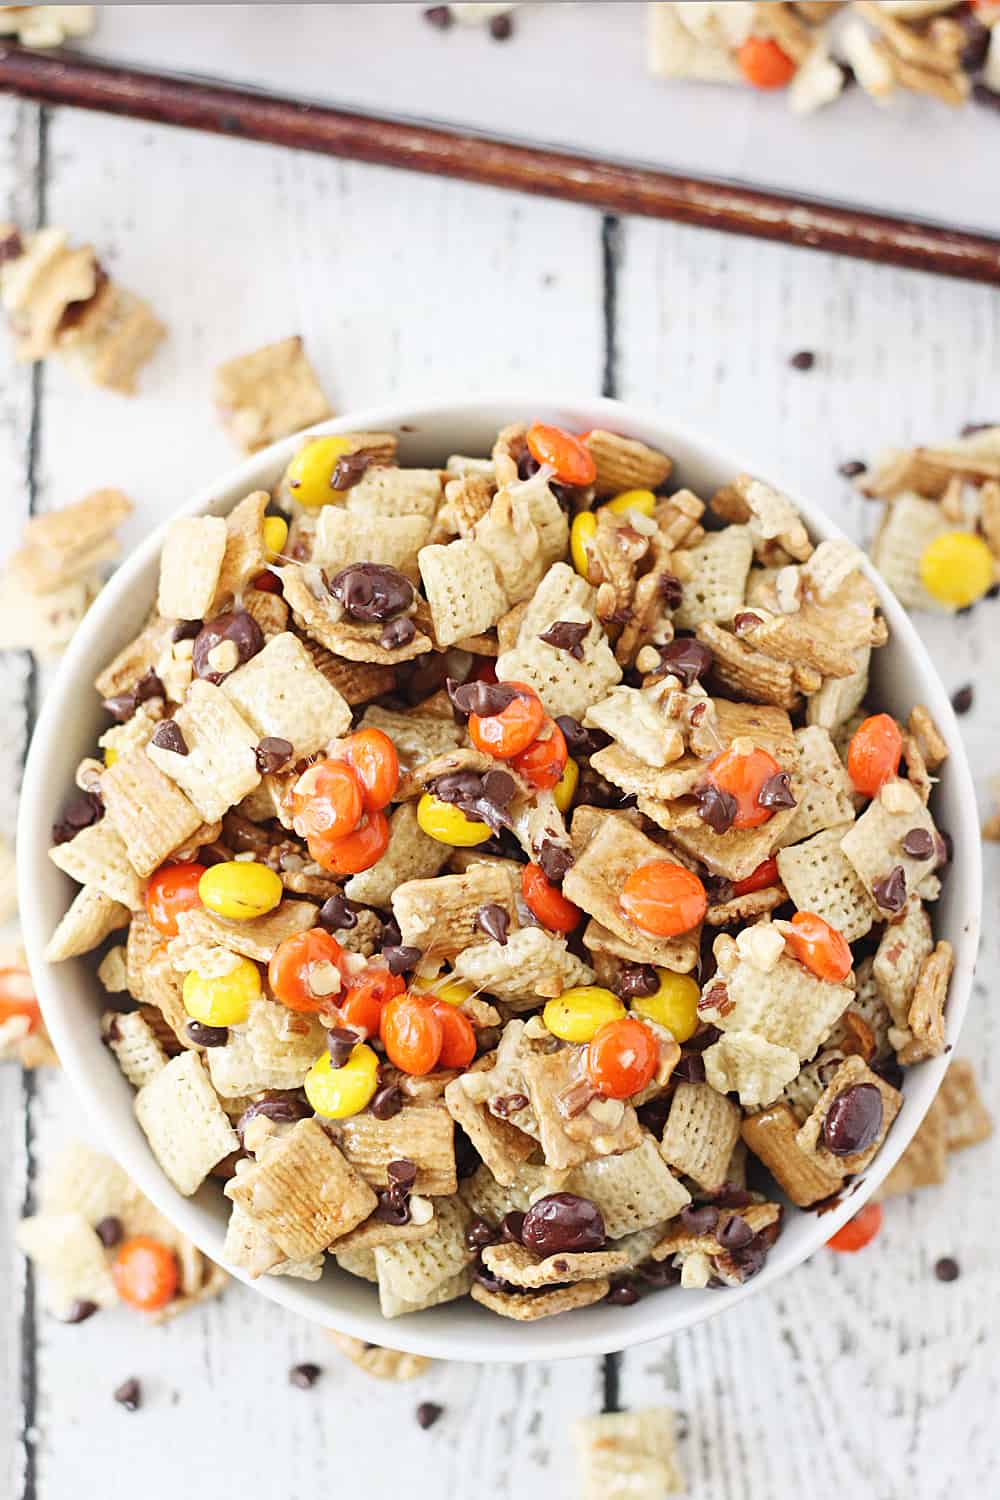 Easy Harvest Chex Mix - Getting your harvest Chex mix fix is easier than you think. Thanks to this easy recipe, that sweet, peanut-buttery fall Chex mix is only a few minutes away! #chex #chexmix #harvestchexmix #fallchexmix #peanutbutter #easyrecipe #easydessert #dessert #sweet #halfscratched #CreatewithKaro #KaroSyrup #Recipeideas #ad